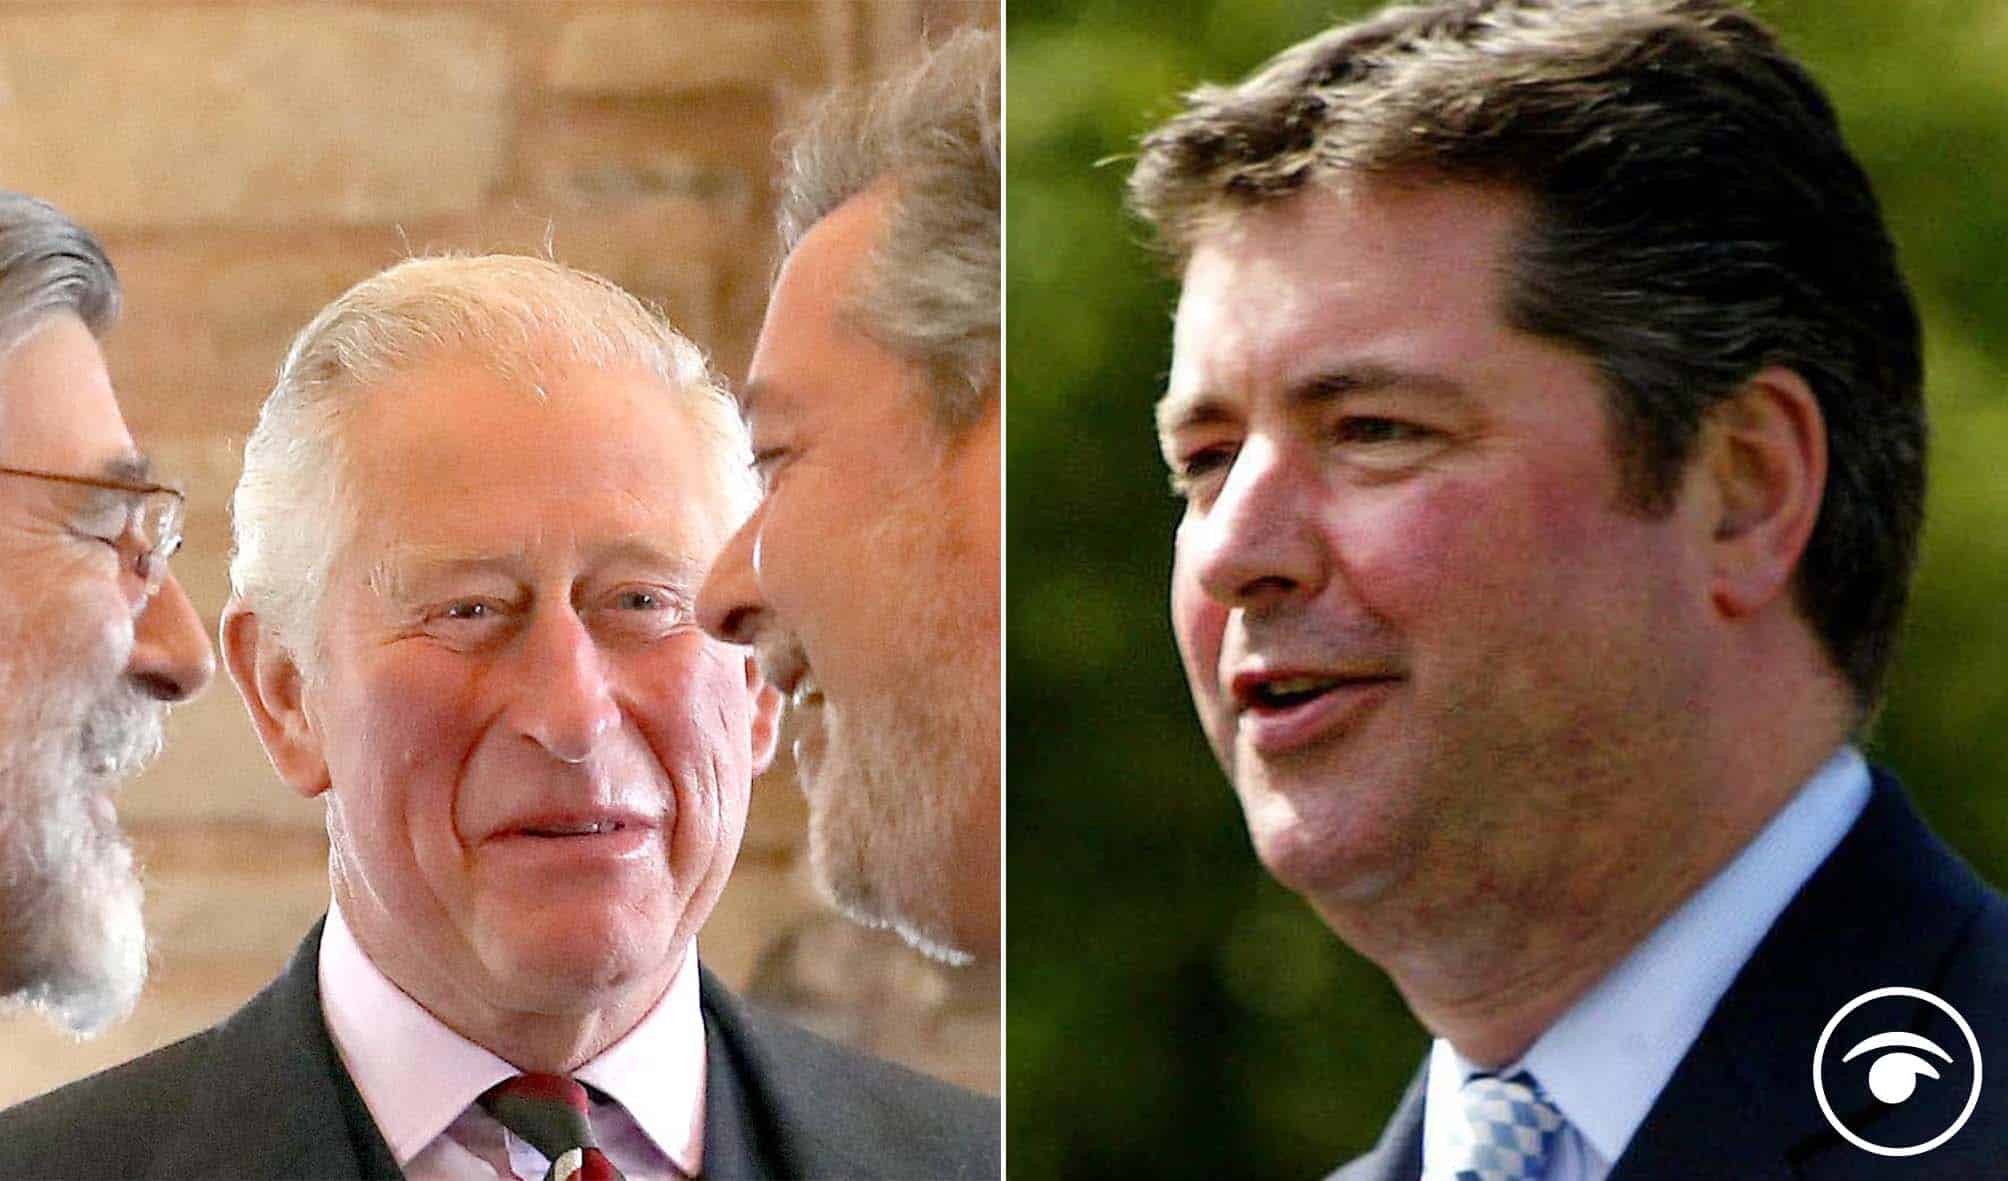 ‘Prince should own up & accept responsibility’ as Charles’ aide could face police probe